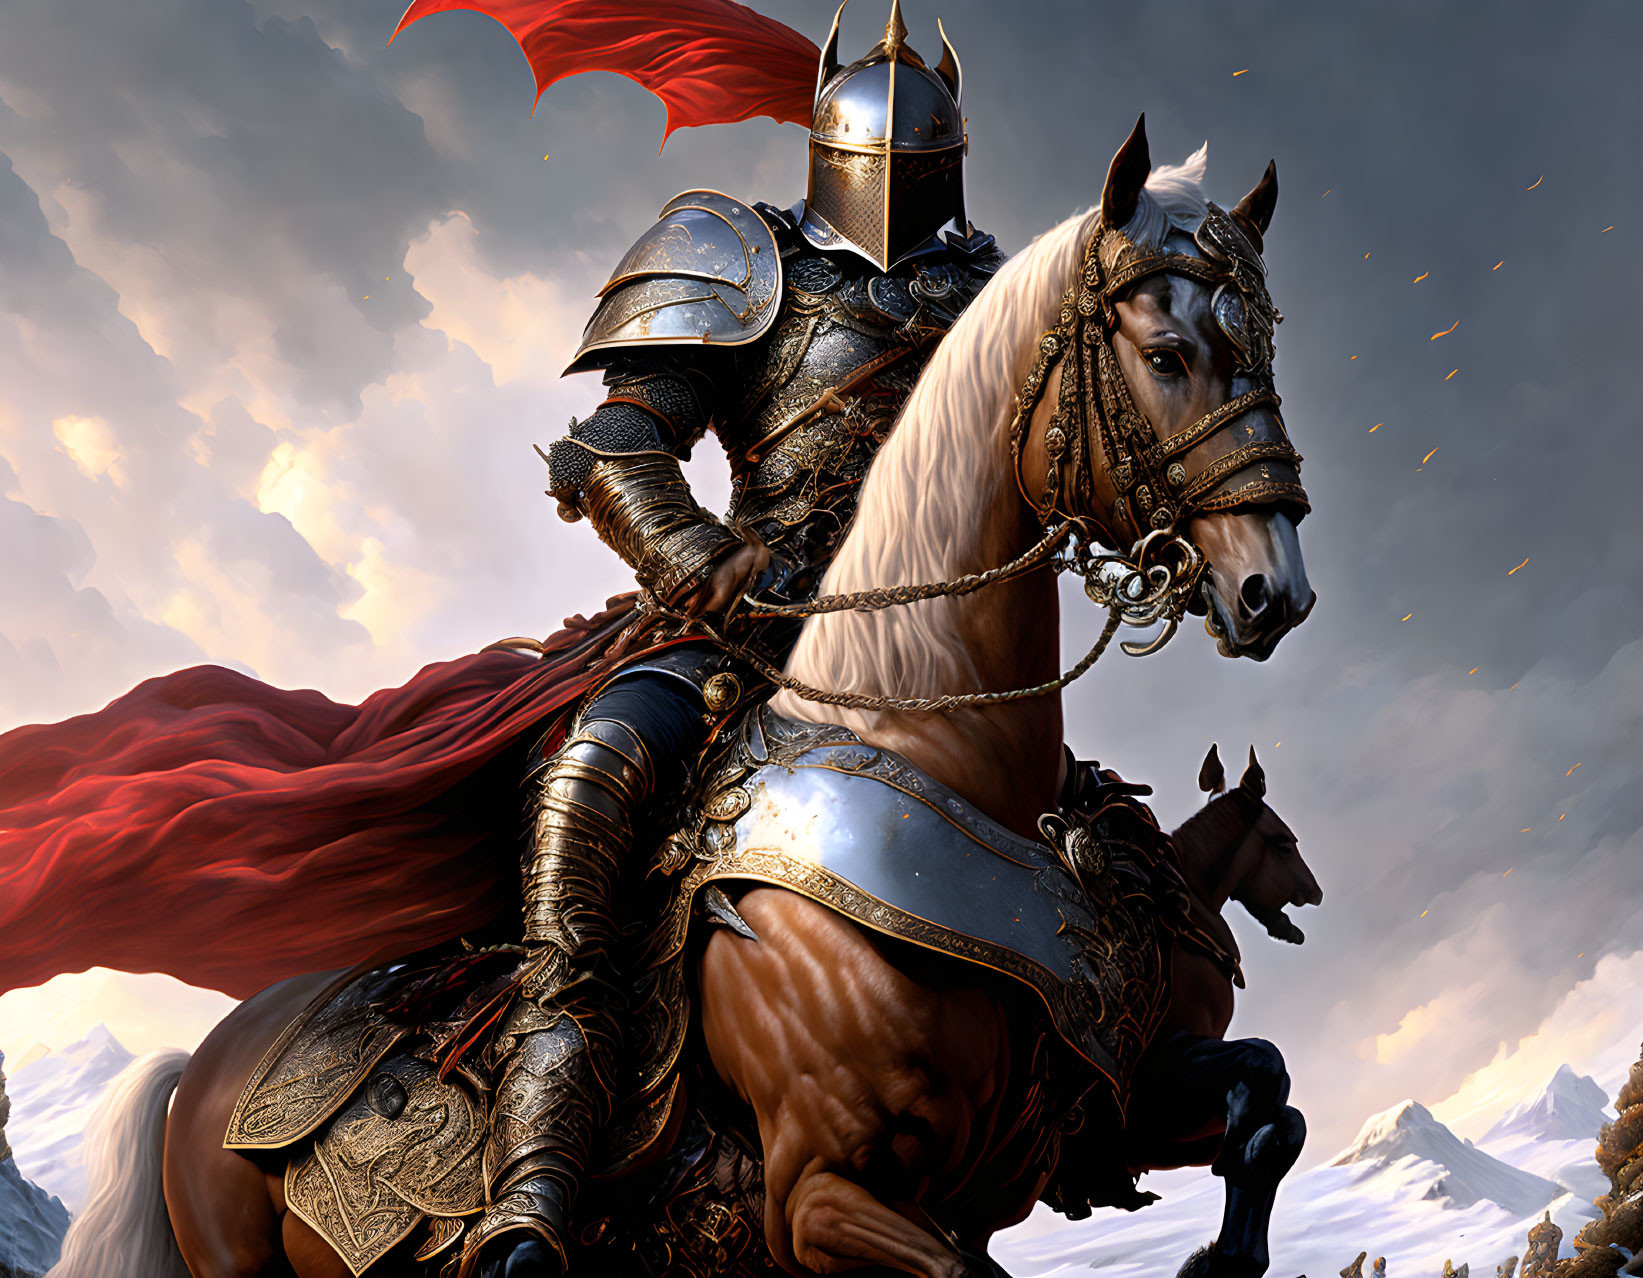 Medieval knight on horseback under dramatic sky with red cloak